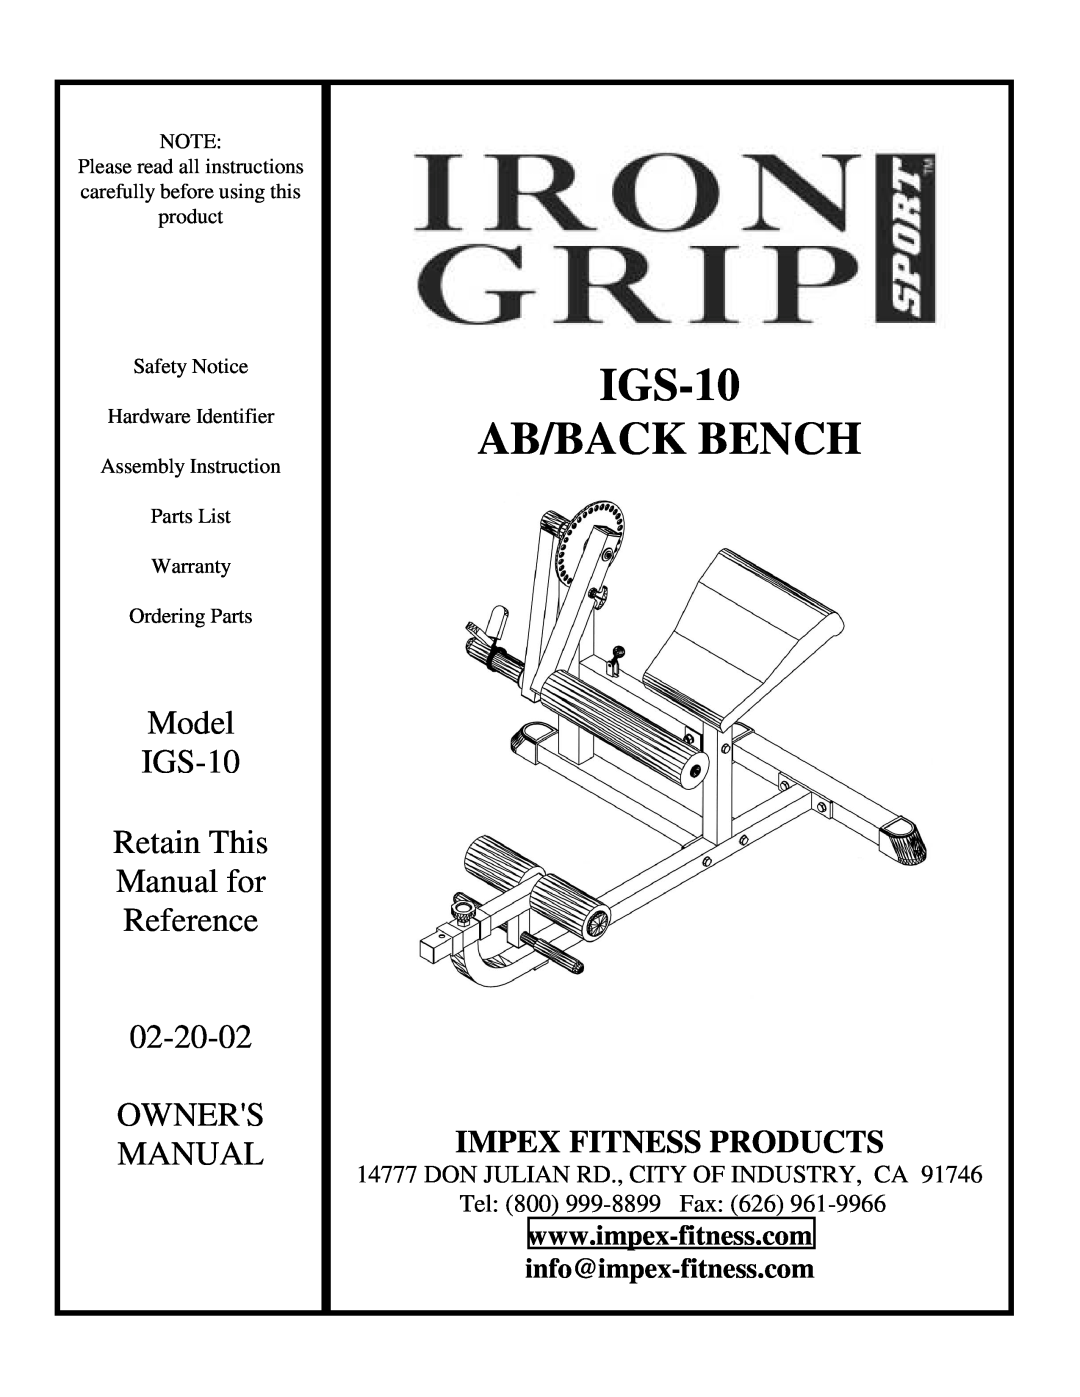 Impex IGS-10 manual info@impex-fitness.com, Ab/Back Bench, Model, Retain This, Manual for, Reference, Owners, 02-20-02 